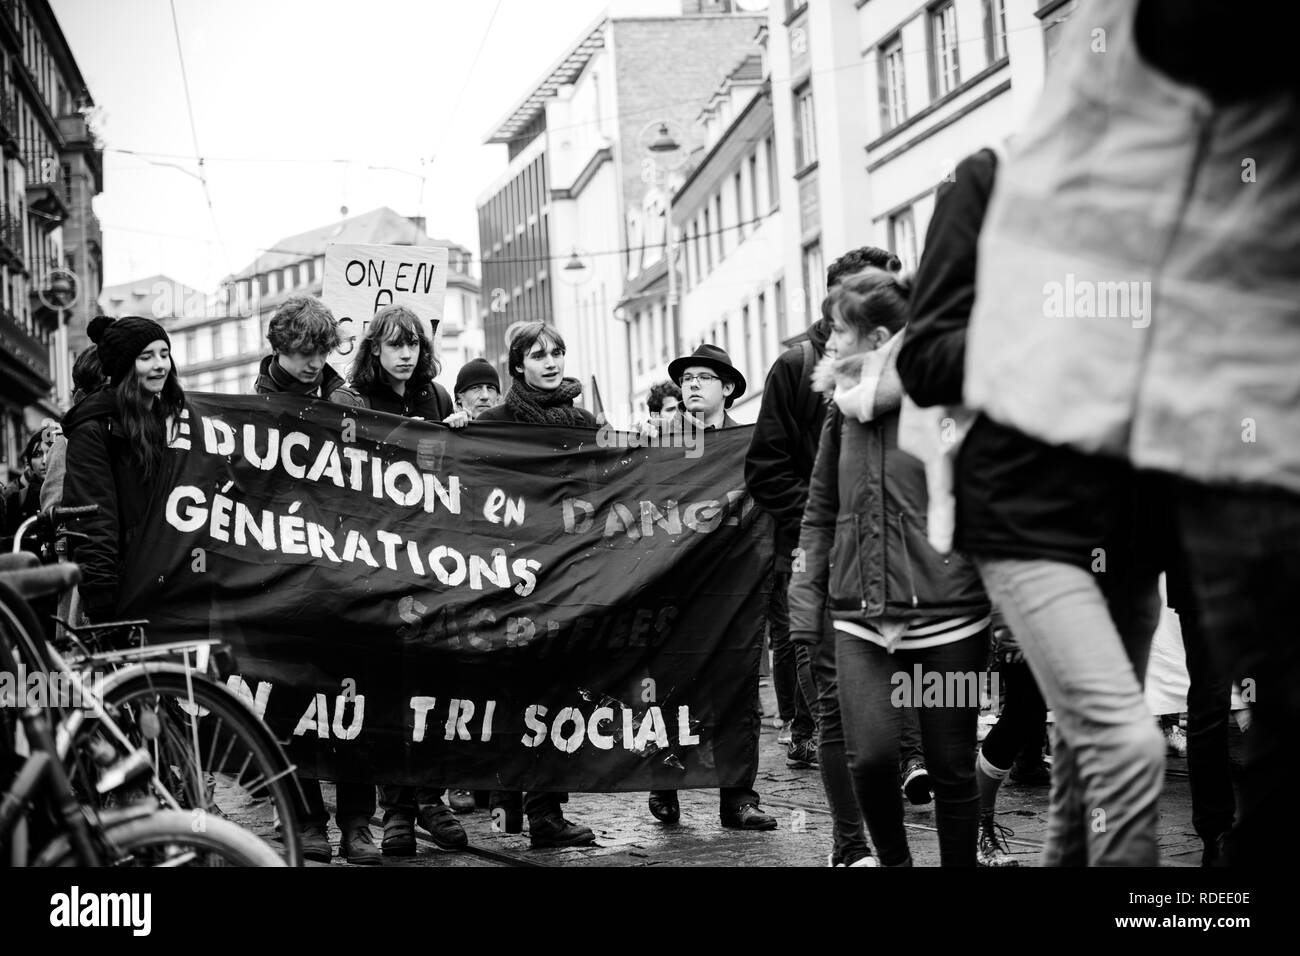 STRASBOURG, FRANCE  - MAR 22, 2018: Education generation by students with demonstration protest against Macron French government string of reforms, mutiple trade unions called public workers to strike - black and white  Stock Photo